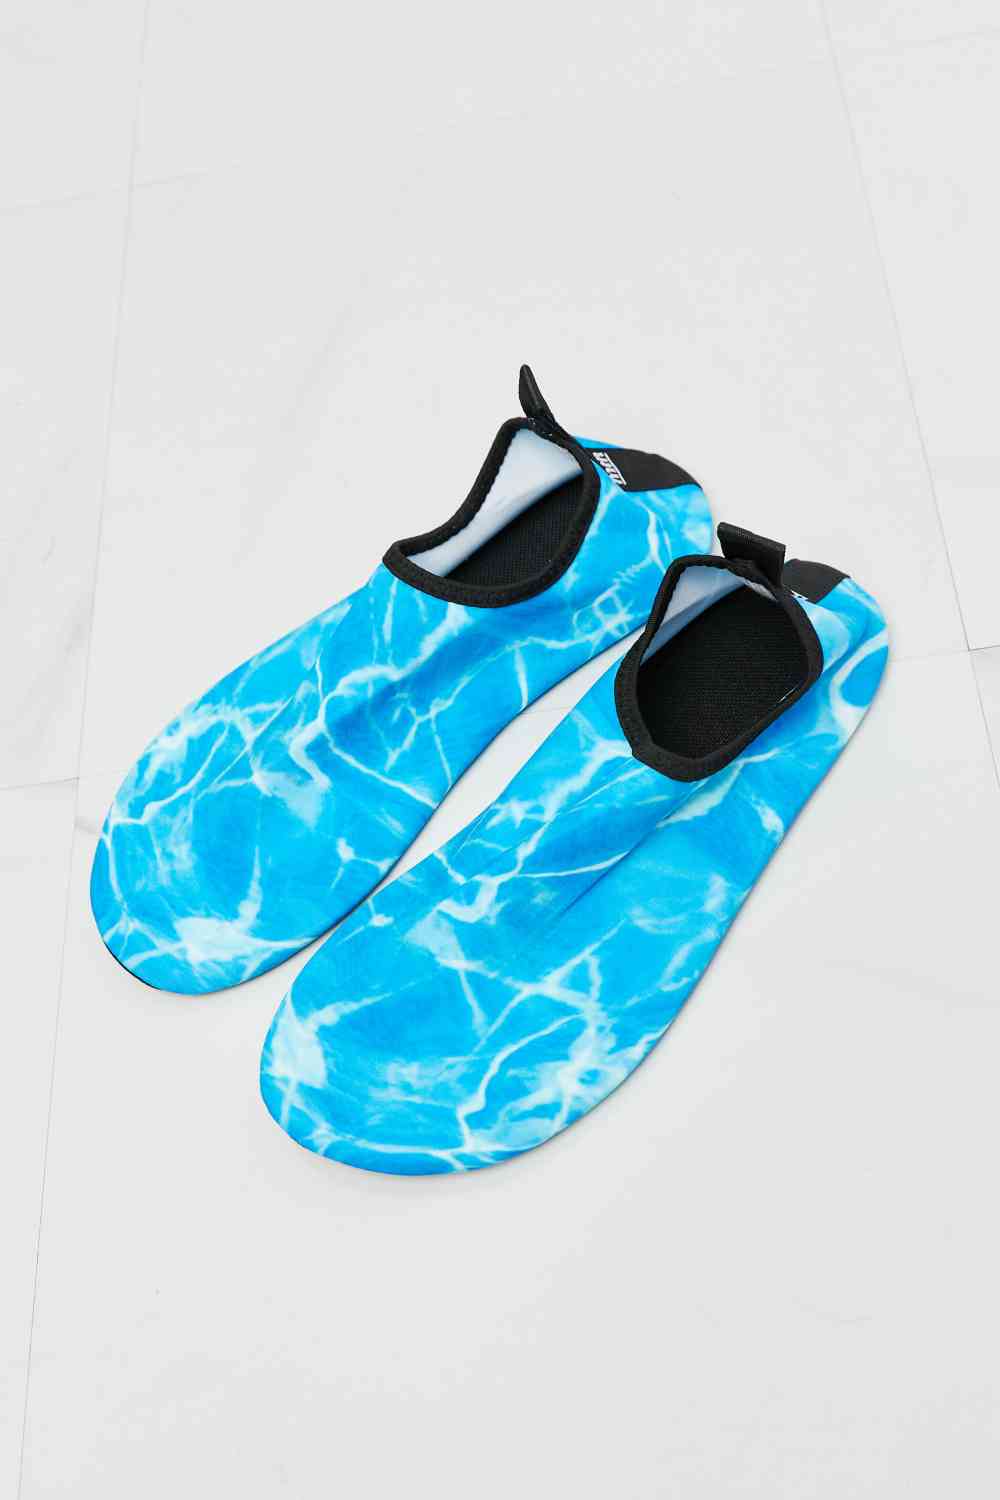 MMshoes On The Shore Water Shoes in Sky Blue No 6